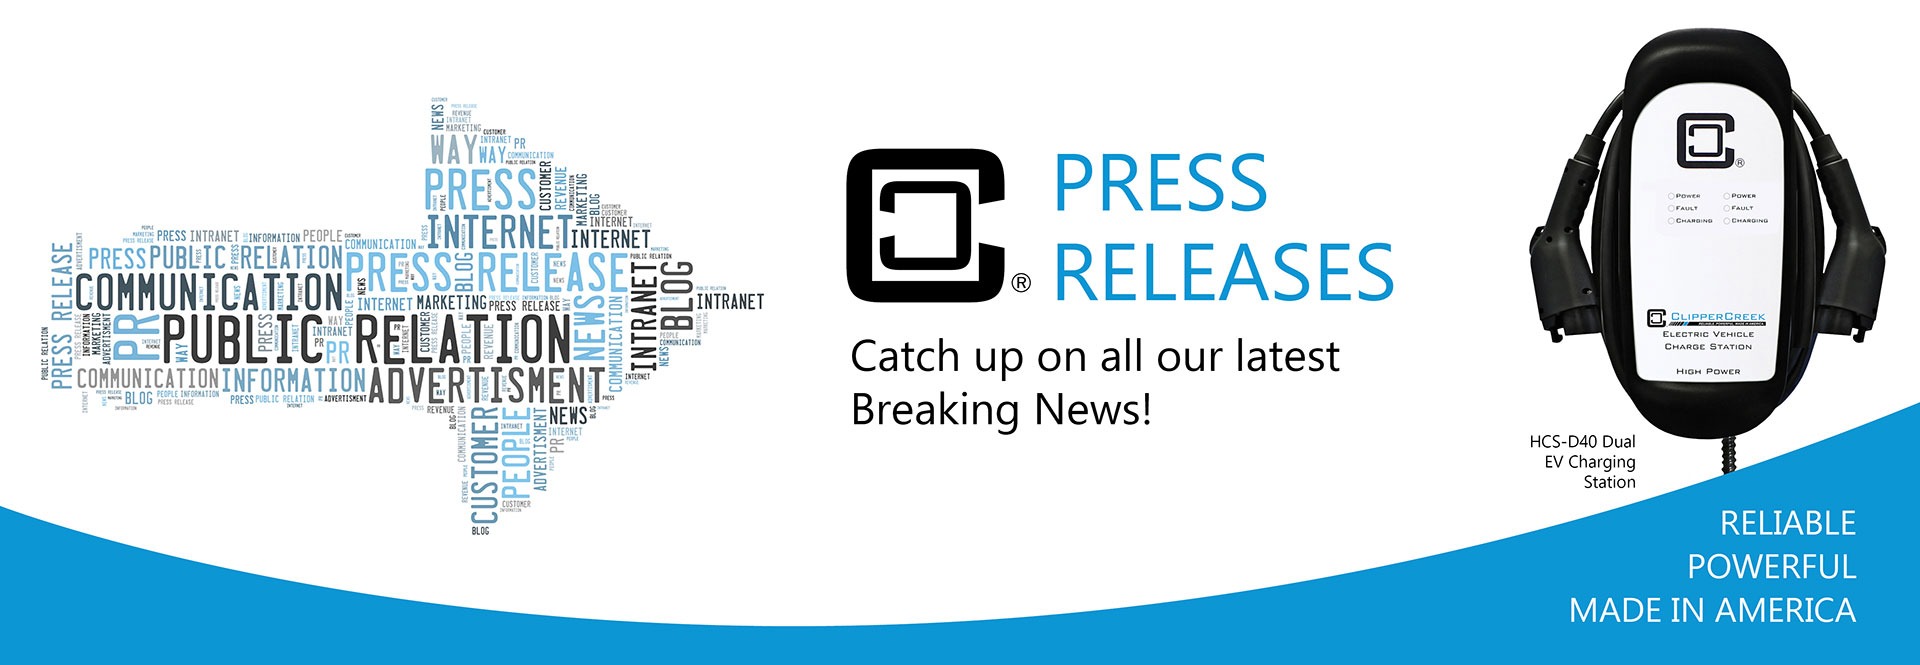 ClipperCreek Press Releases and Latest News Slider